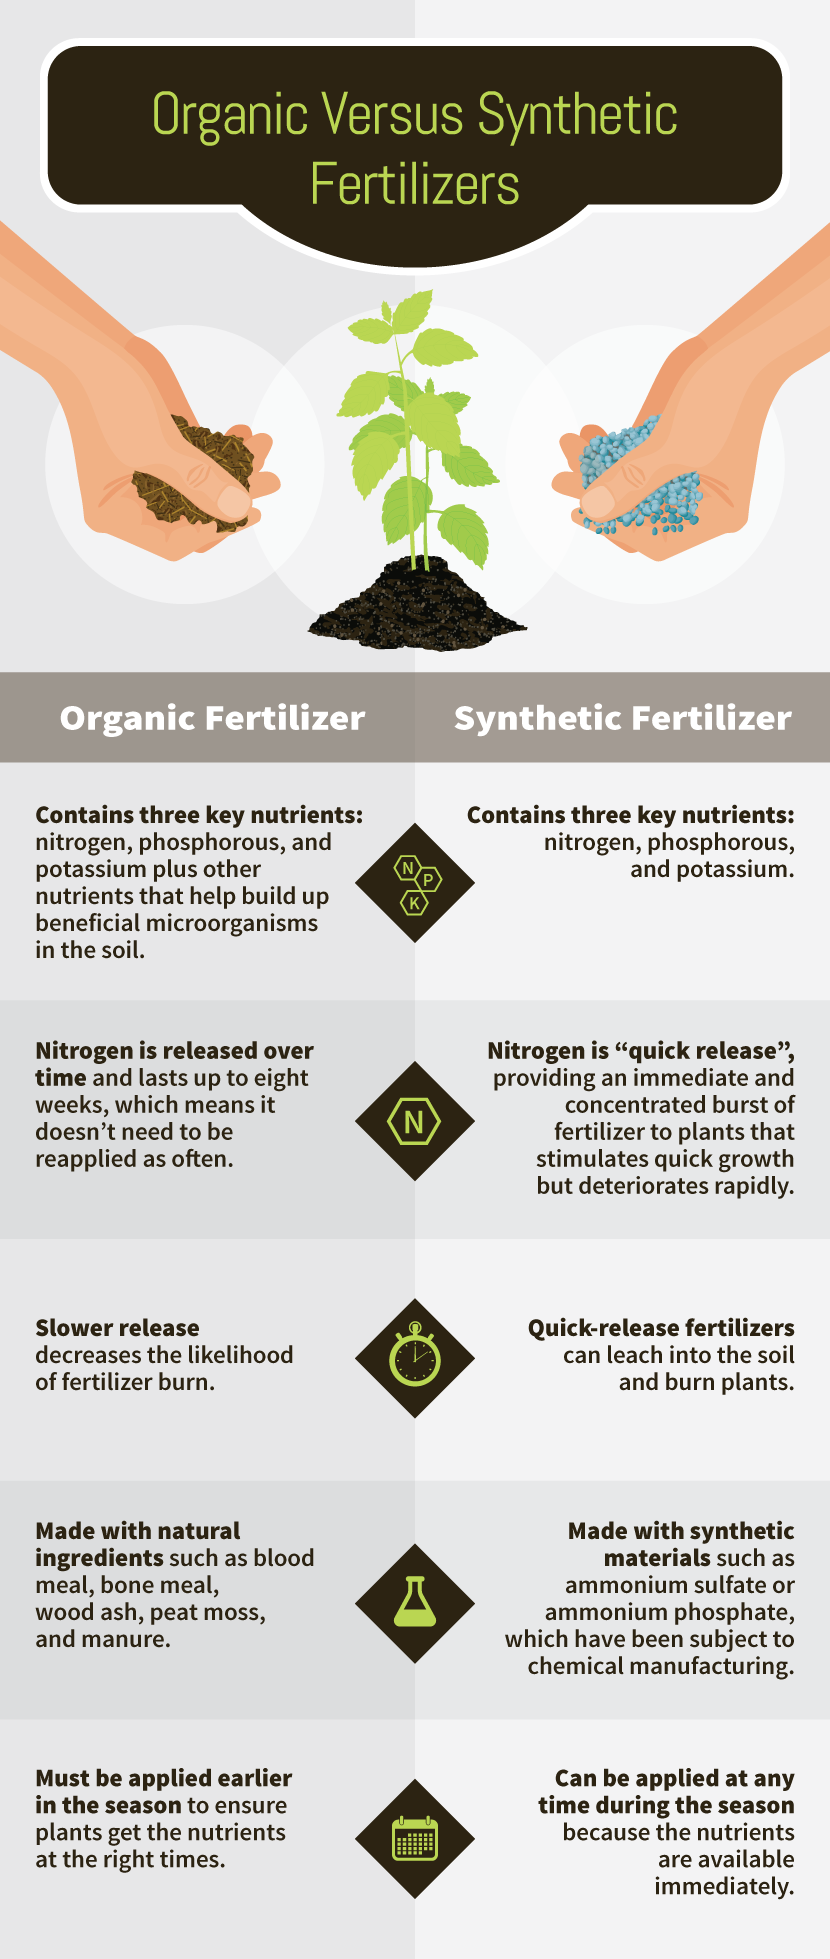 Organic Vs. Synthetic - Making Your Own Environmentally Friendly Garden Fertilizers Is Easier Than You Think